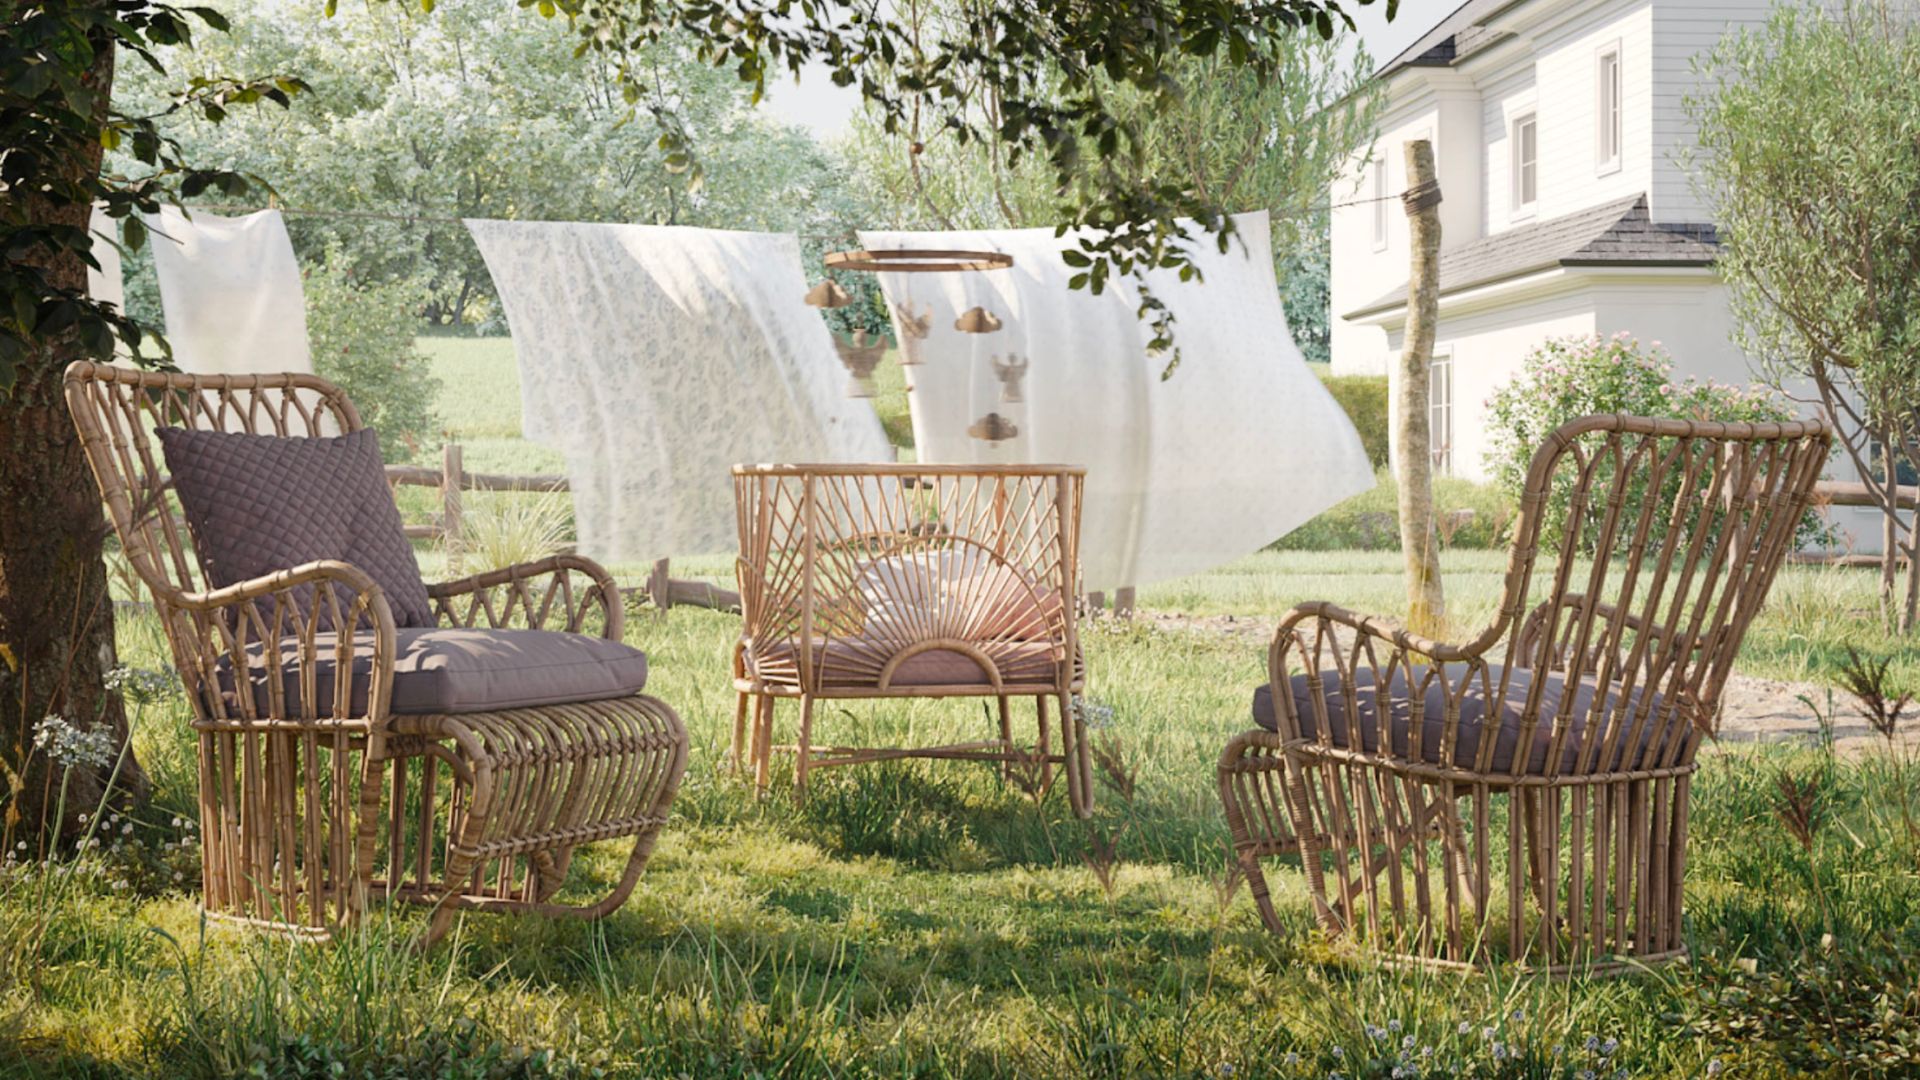 An outdoor garden setting with elegant wicker furniture, capturing the essence of spring relaxation, and showcasing the versatility of product offerings in seasonal campaigns.